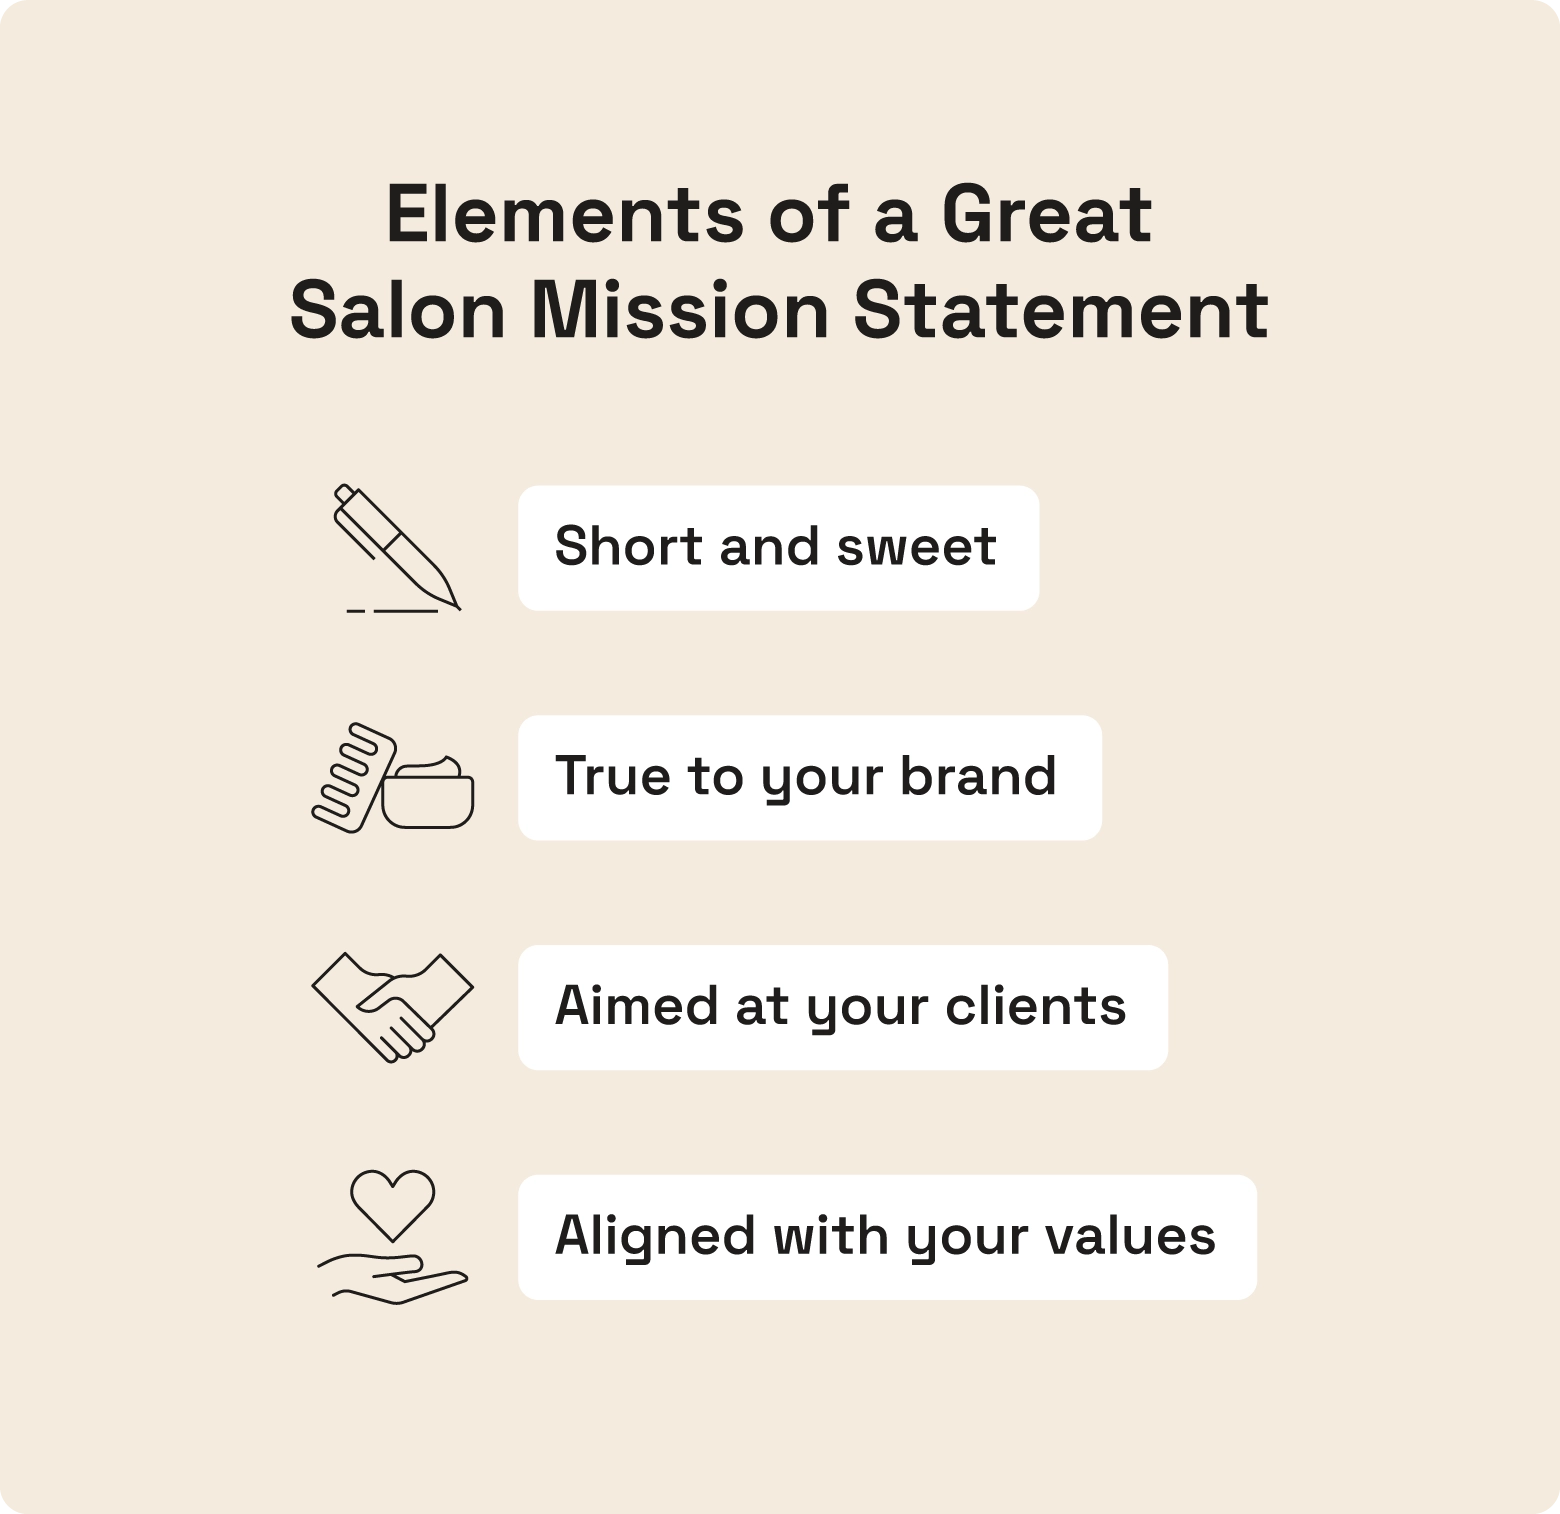 Four elements that make up a great salon mission statement.